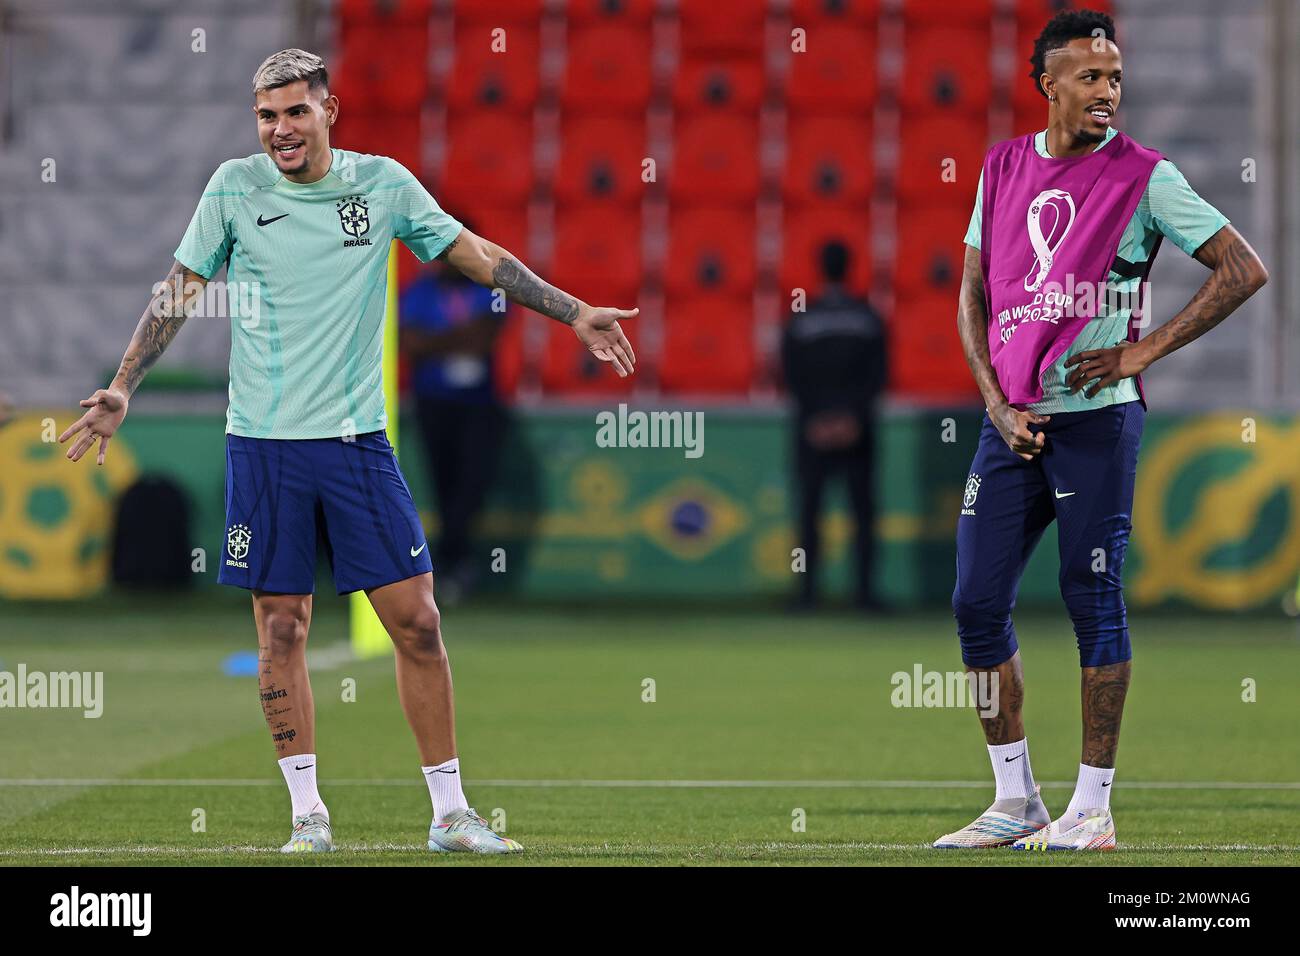 Doha, Qatar. 08th Dec, 2022. Bruno Guimaraes and Eder Militao from Brazil, during training at the Grand Hamad Stadium, this Thursday 8th. The team is preparing to face Croatia in the quarterfinals of the FIFA World Cup Qatar 2022. 30761 (Heuler Andrey/SPP) Credit: SPP Sport Press Photo. /Alamy Live News Stock Photo